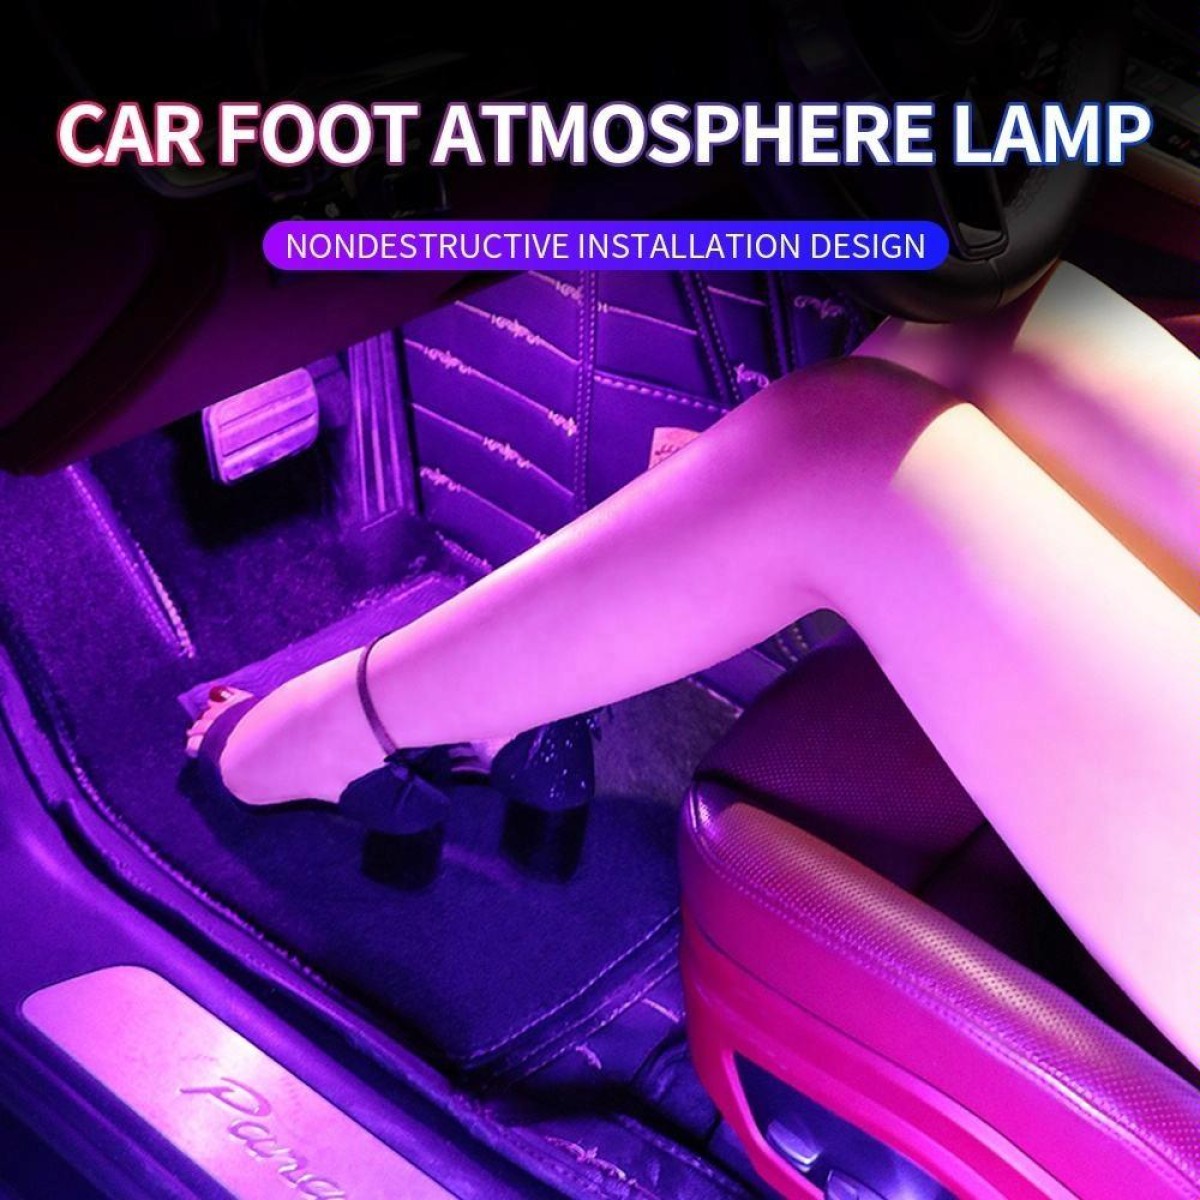 Car 4 in 1 USB RGB Foot Colorful LED Atmosphere Light